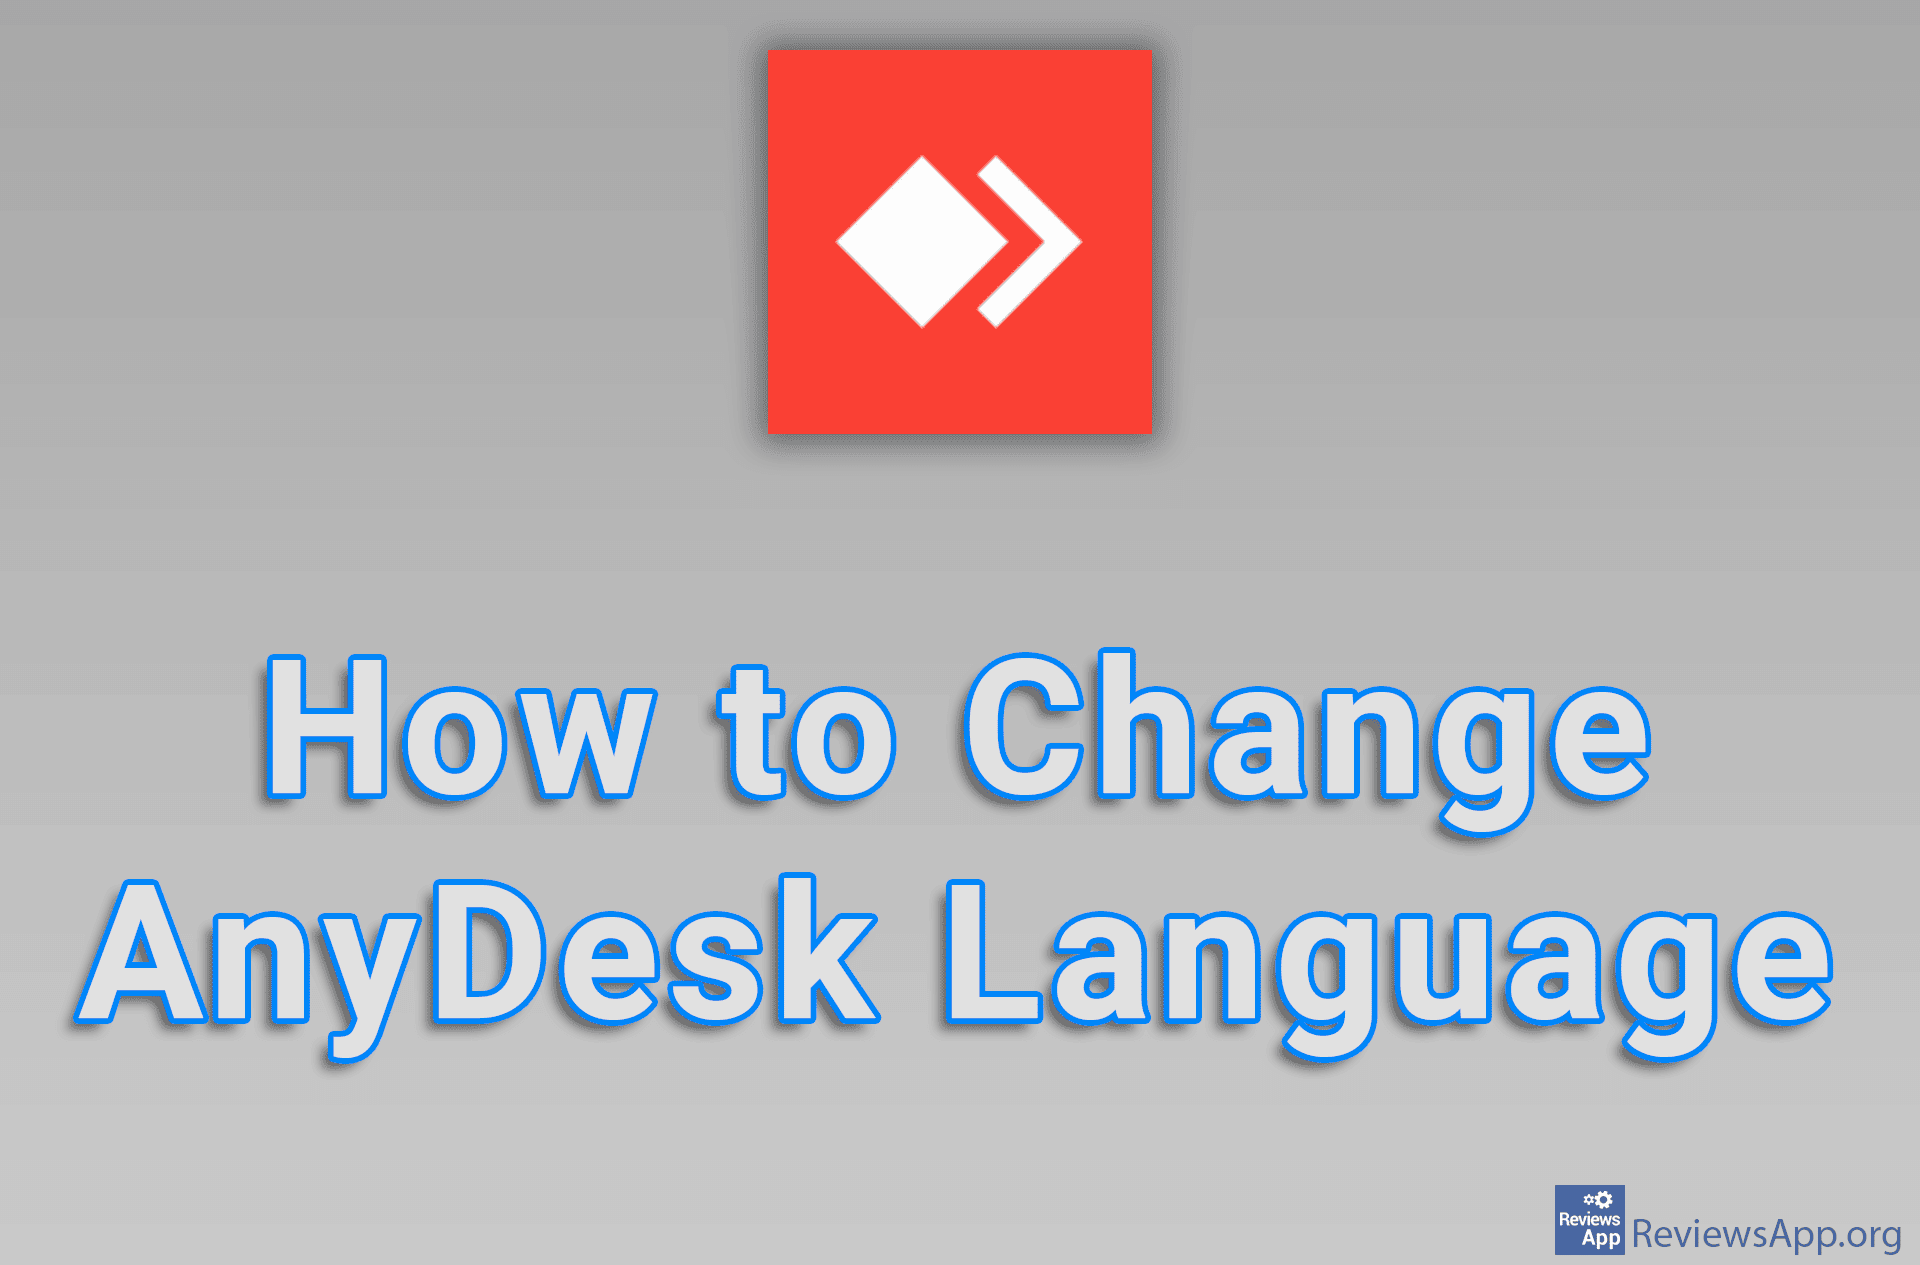 How to Change AnyDesk Language